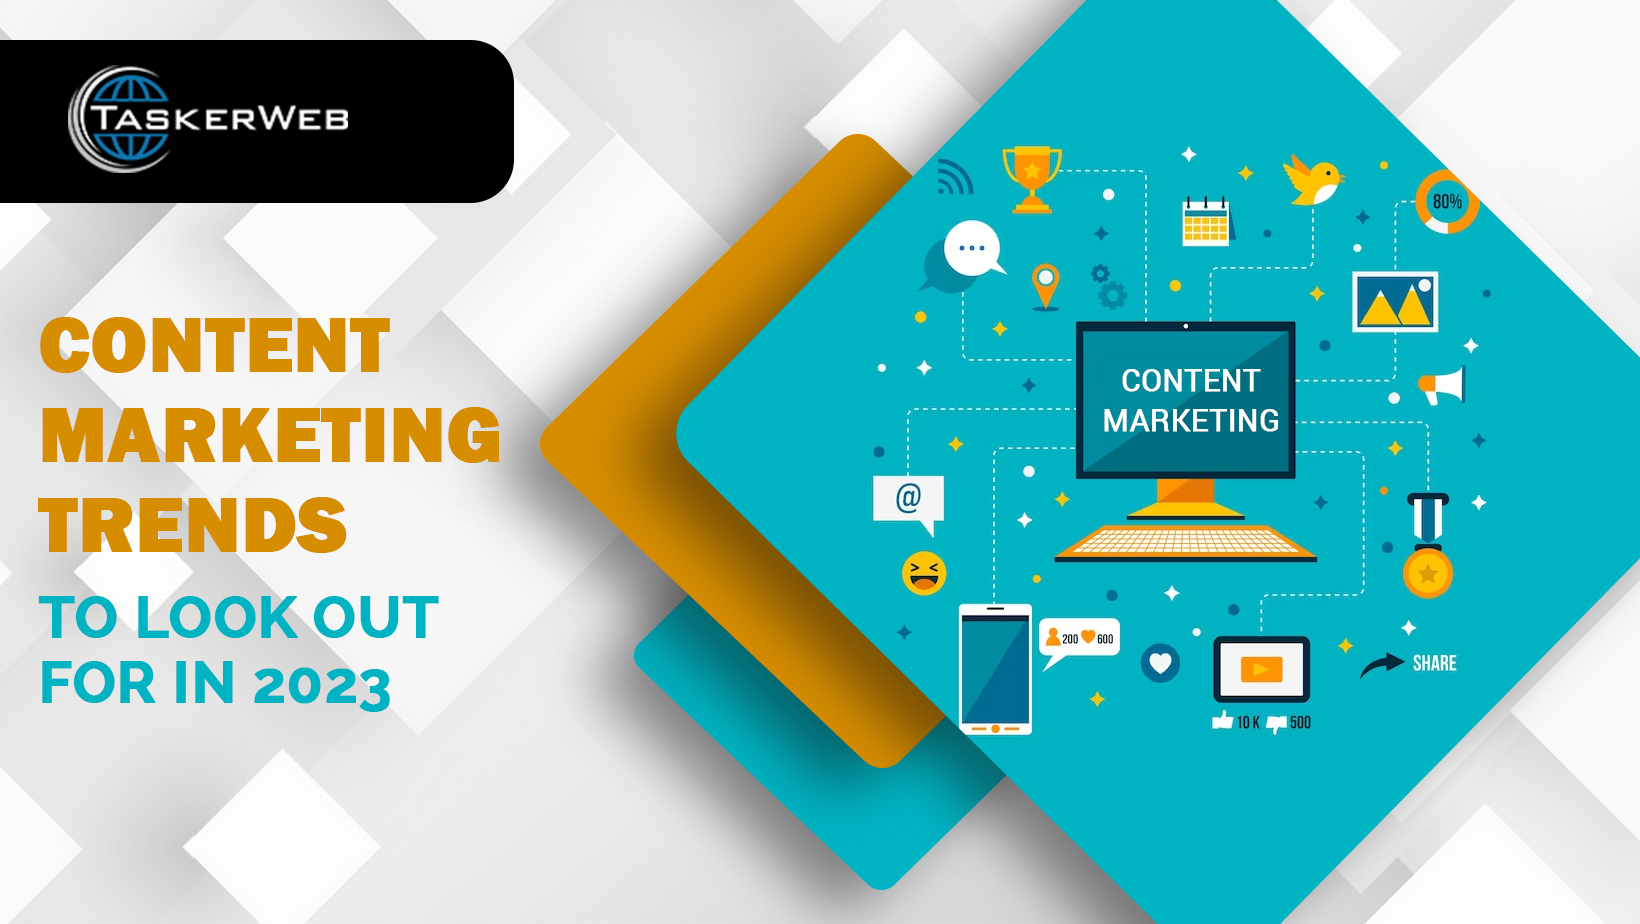 Content Marketing Trends To Look Out For In 2023